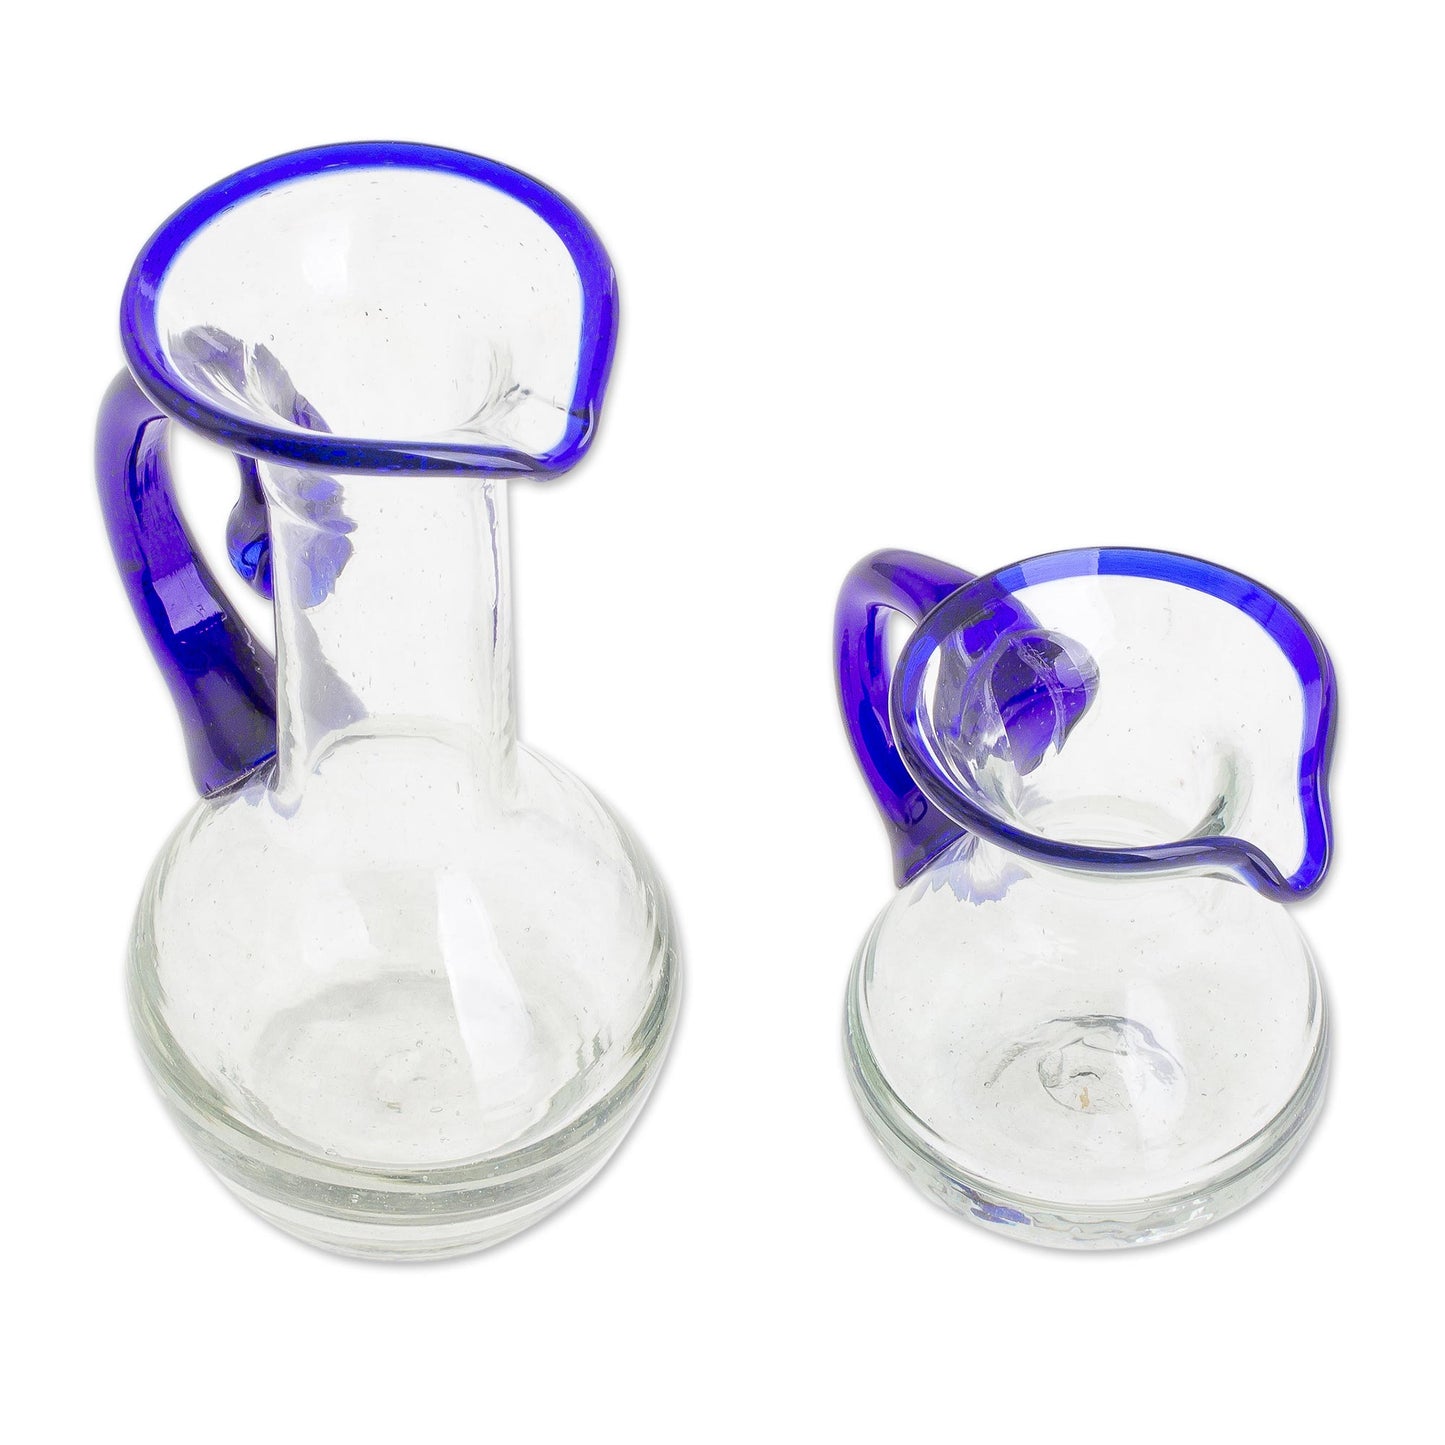 Clear Seas Handblown Small Recycled Glass Pitchers (Pair)